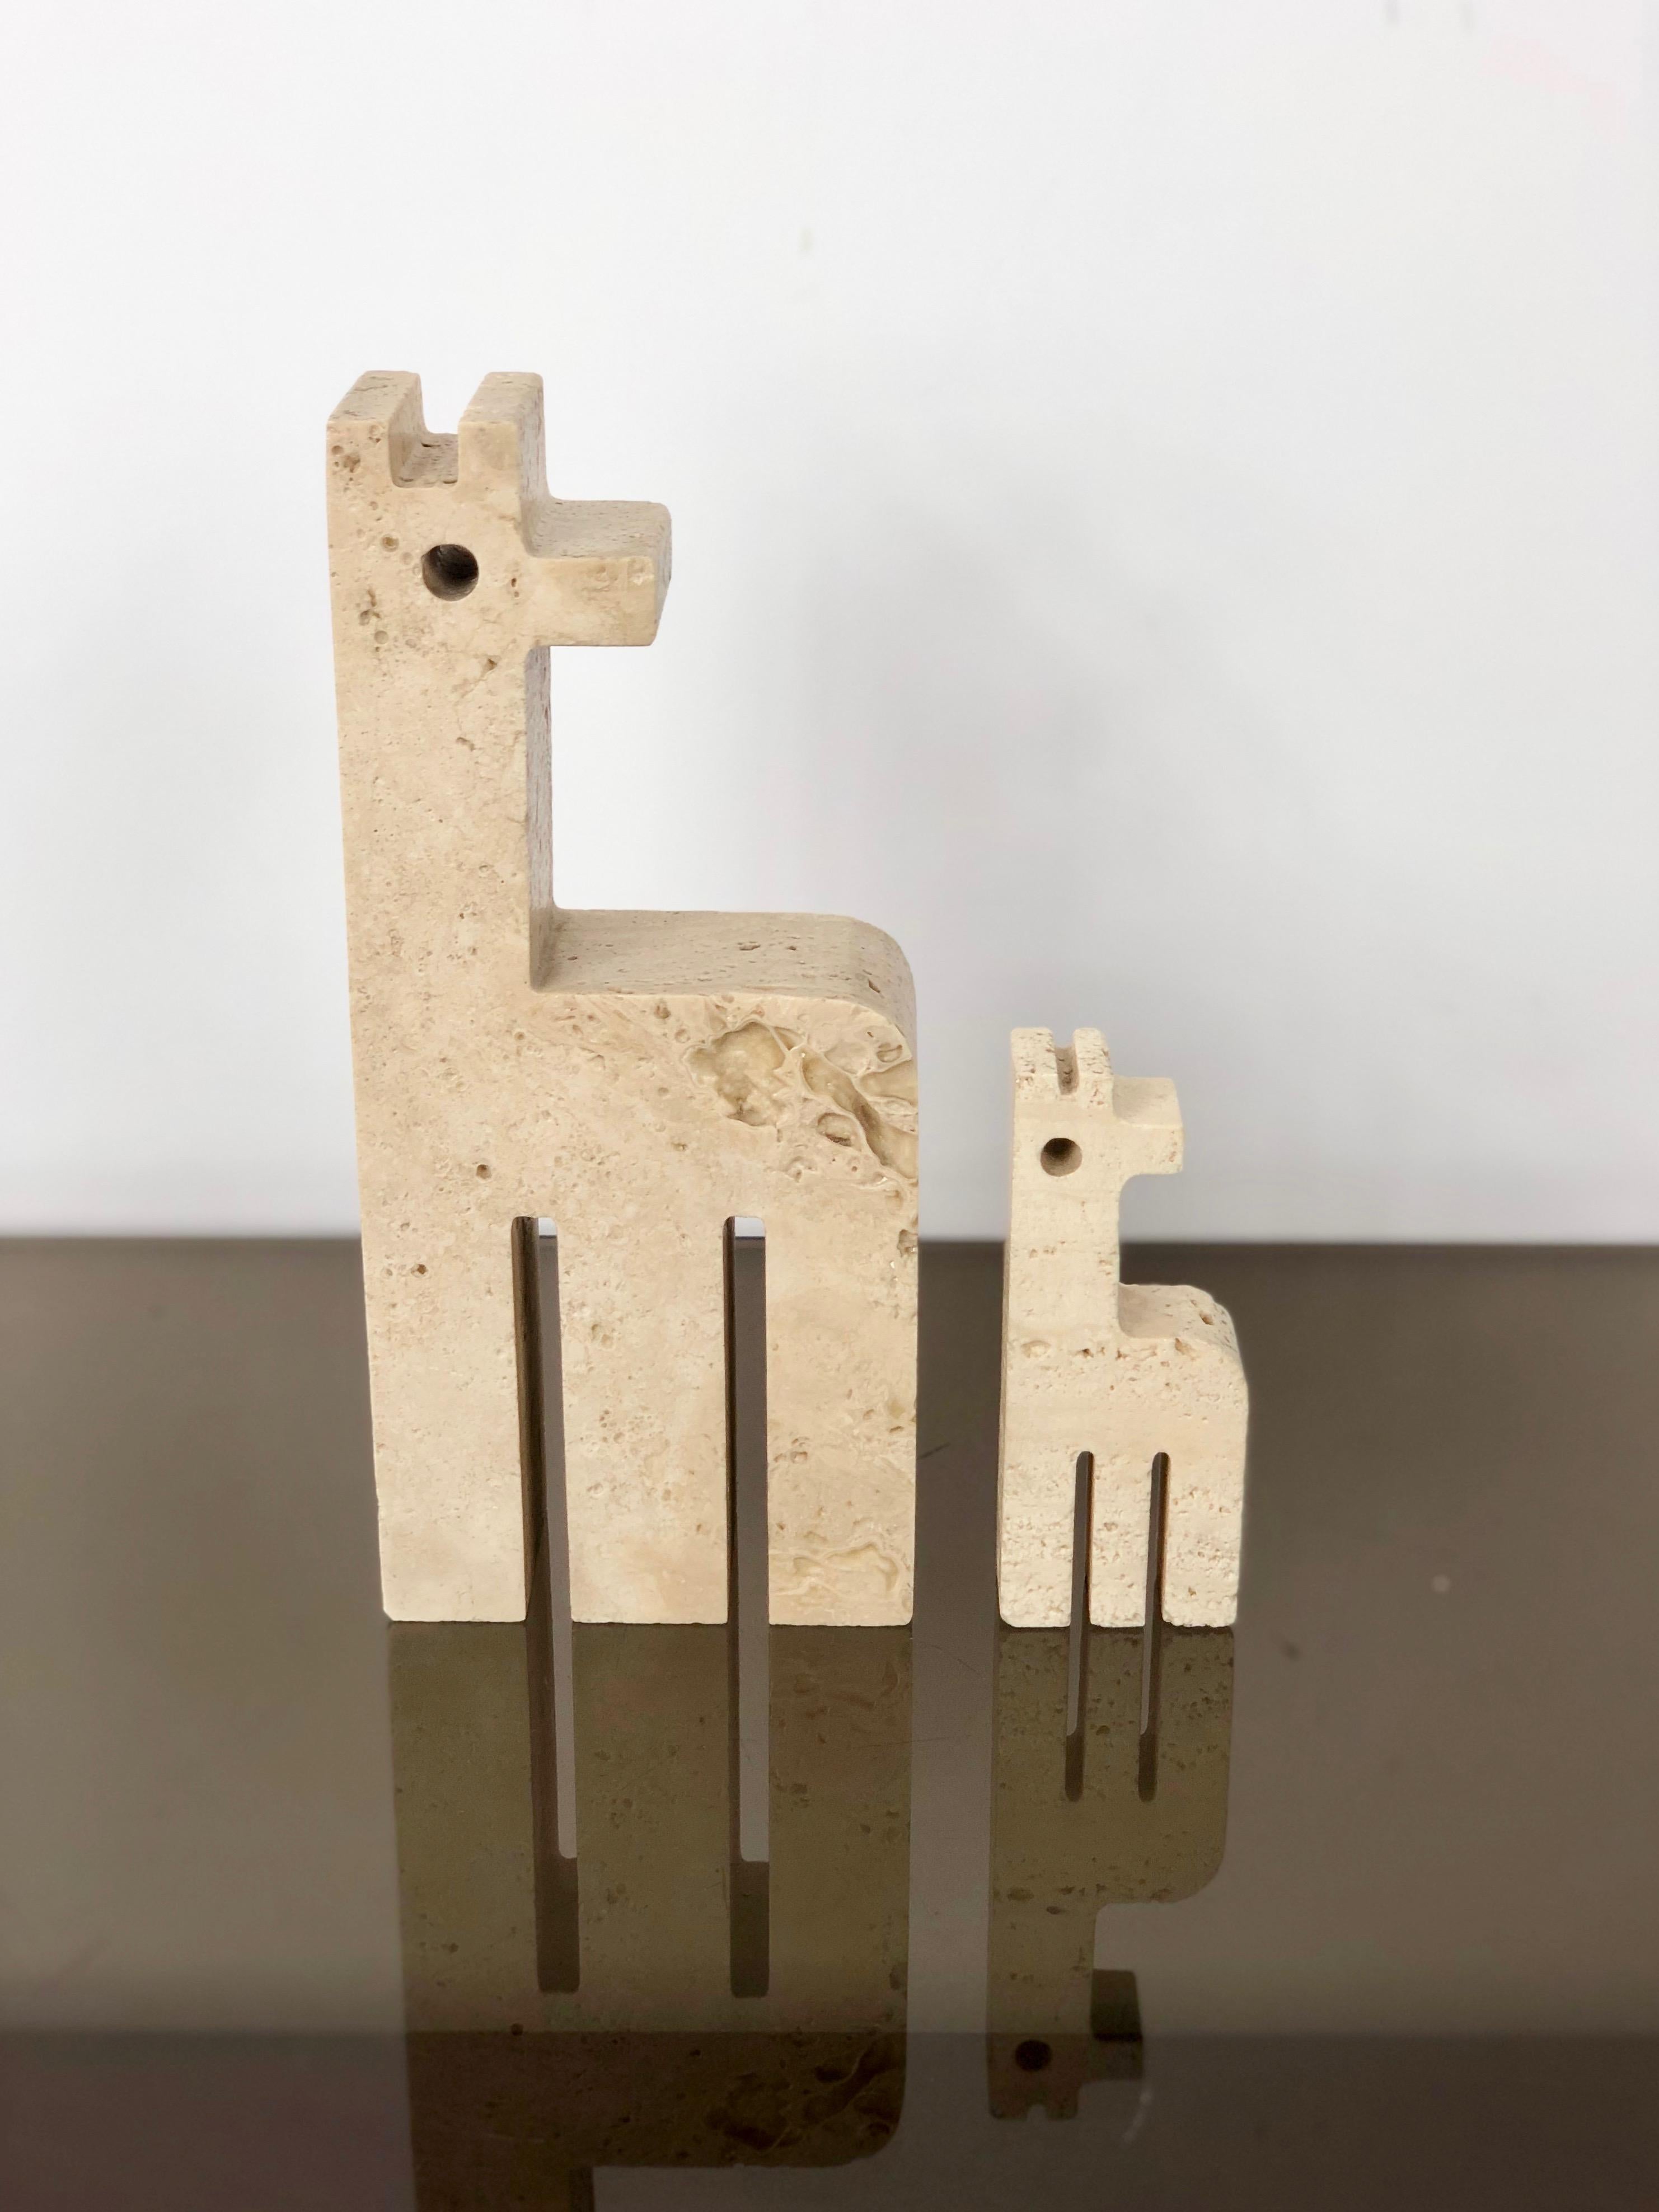 Pair of paperweight / sculpture in travertine, mum giraffe and her cub, by the Italian marble designers Fratelli Mannelli - Italy, 1970s. 

Dimensions:
Big giraffe: 20 x 9 x 4 cm (H x W x D);
Little giraffe: 10 x 4 x 2 cm (H x W x D).